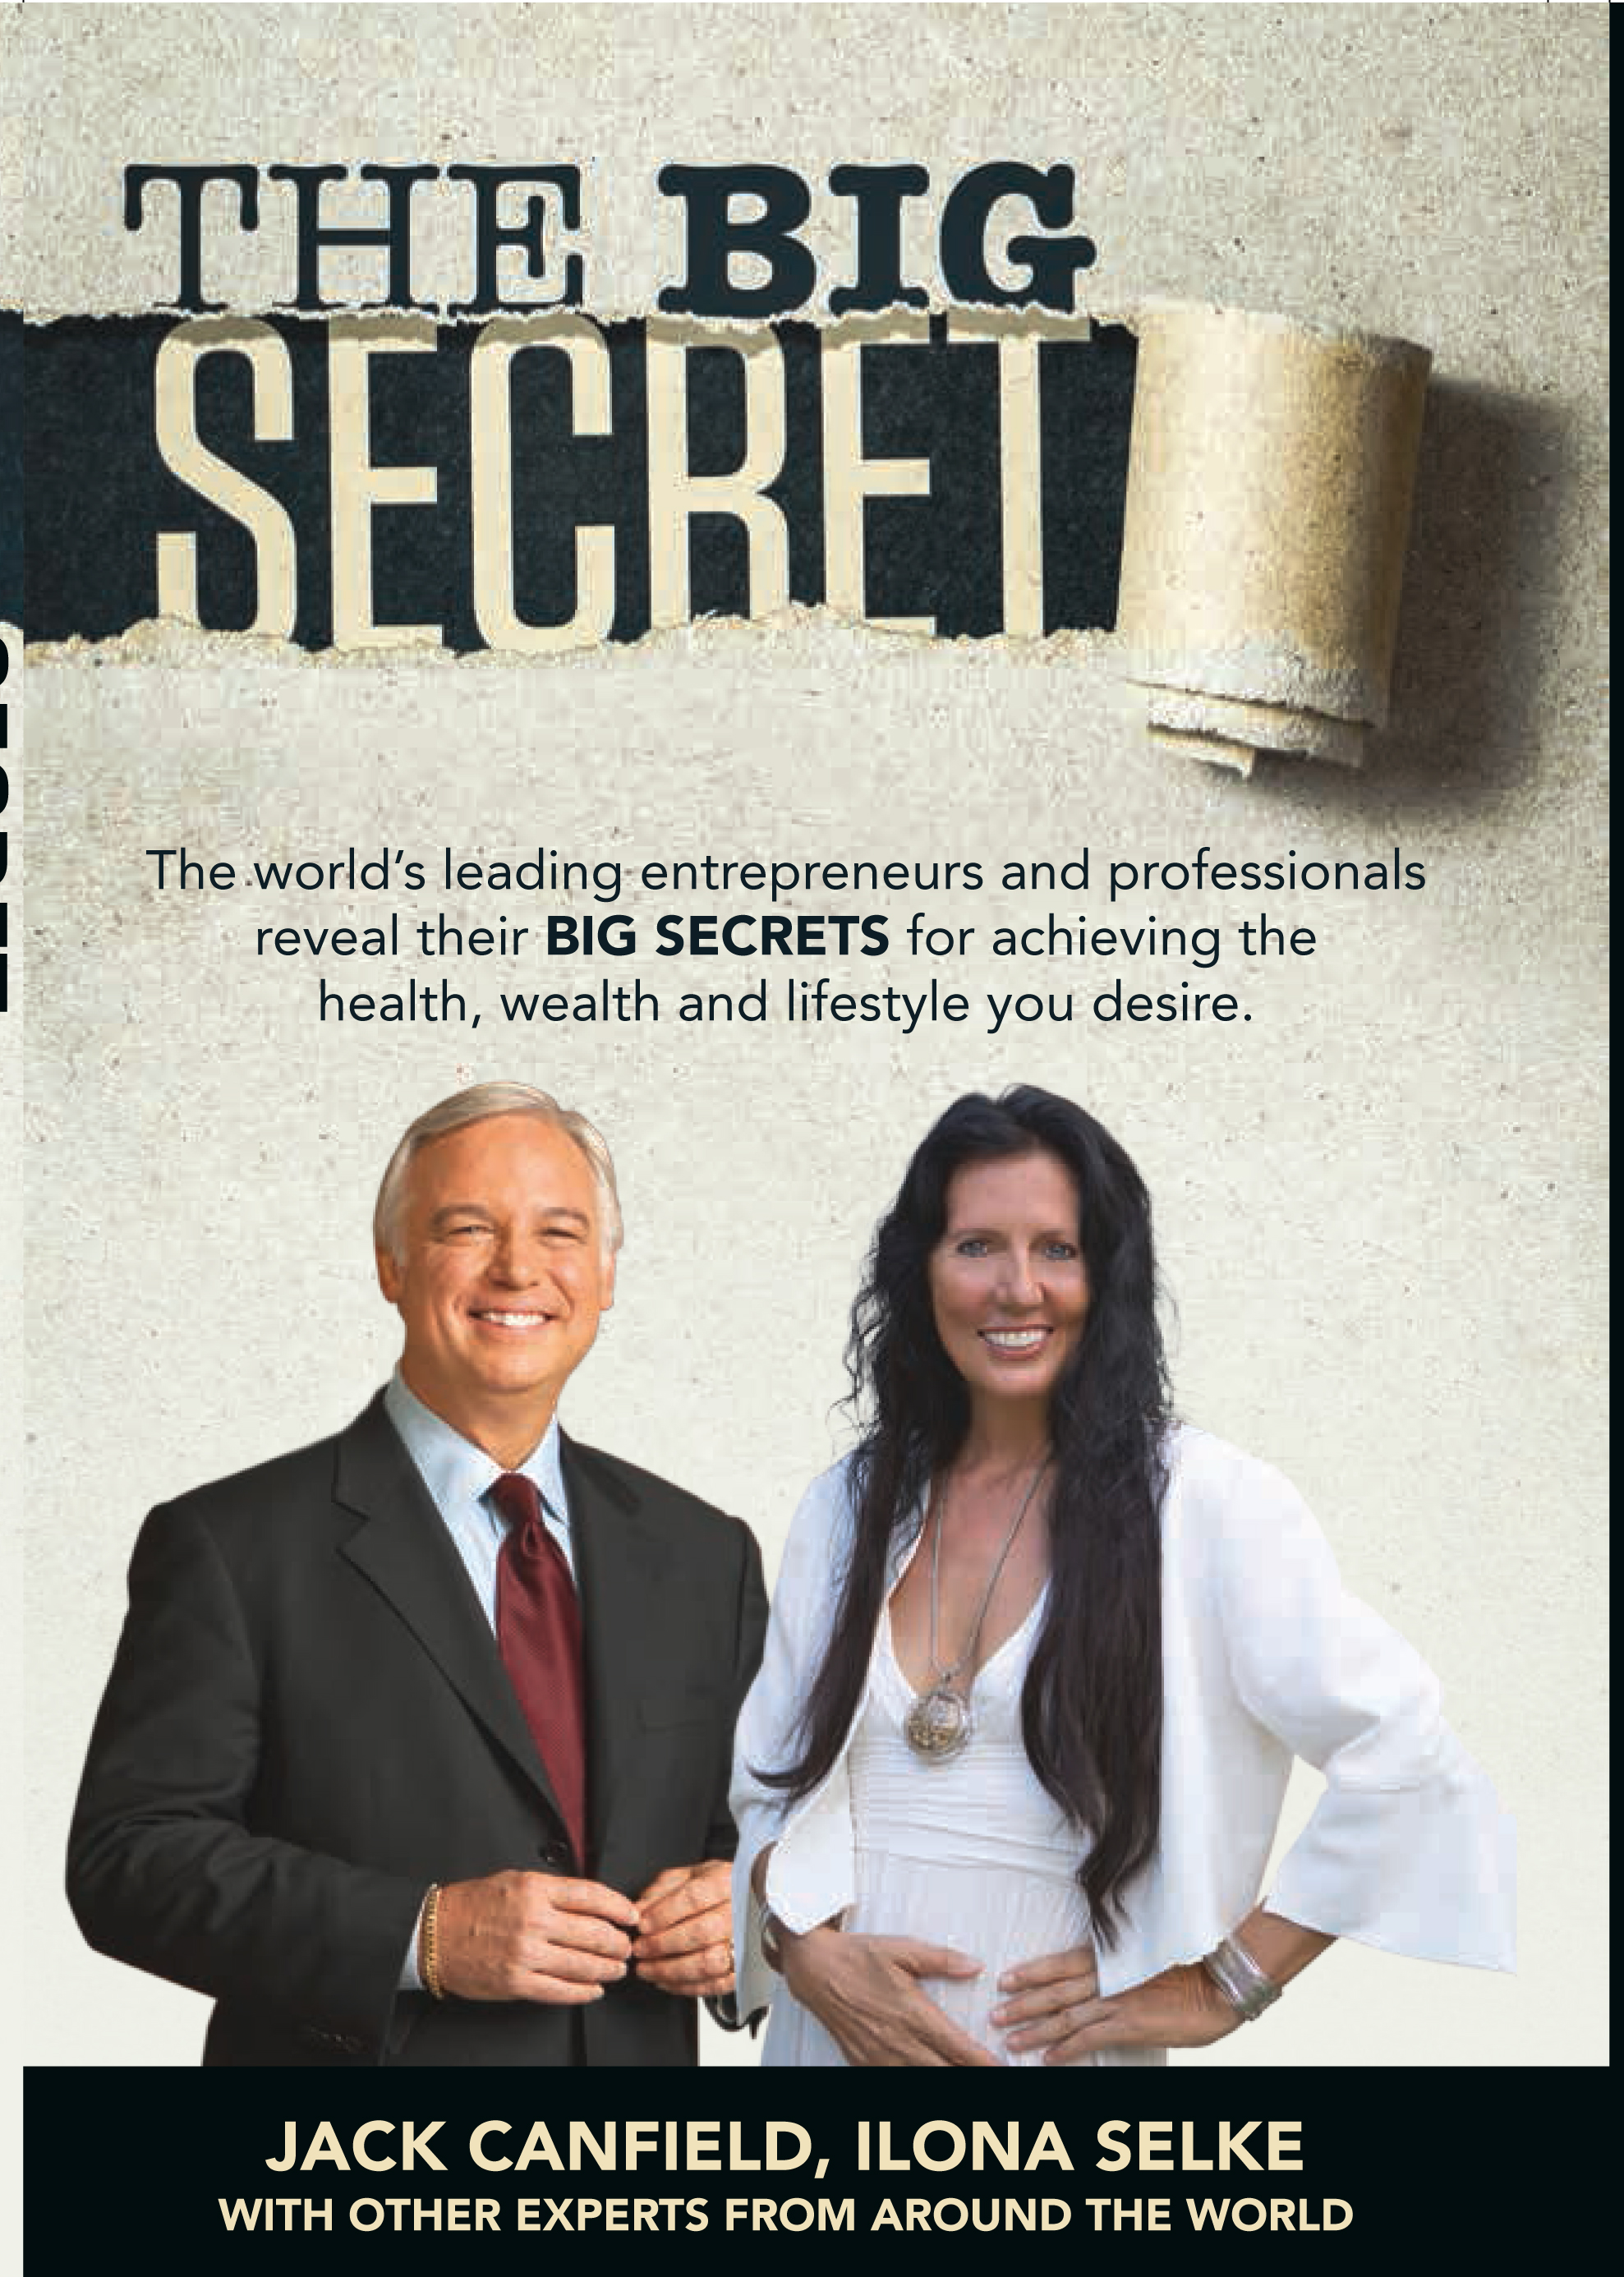 JACK CANFIELD BOOK COVER